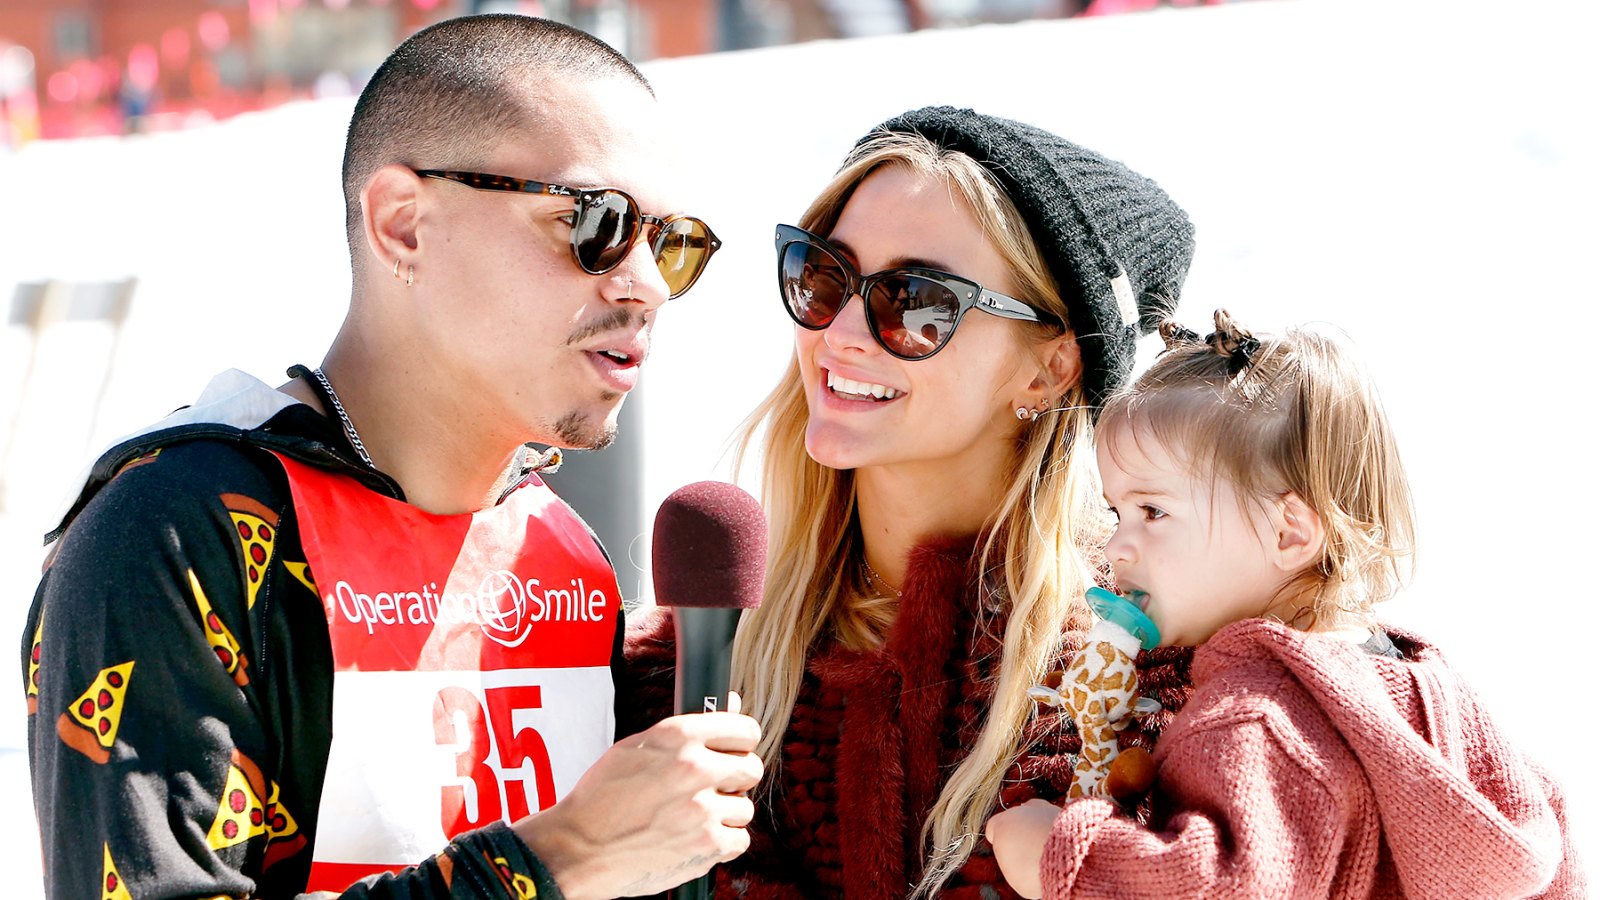 Evan Ross and Ashlee Simpson with their daughter Jagger Snow Ross attend Operation Smile's Celebrity Ski & Smile Challenge Presented By The Rodosky Family on March 11, 2017 in Park City, Utah.